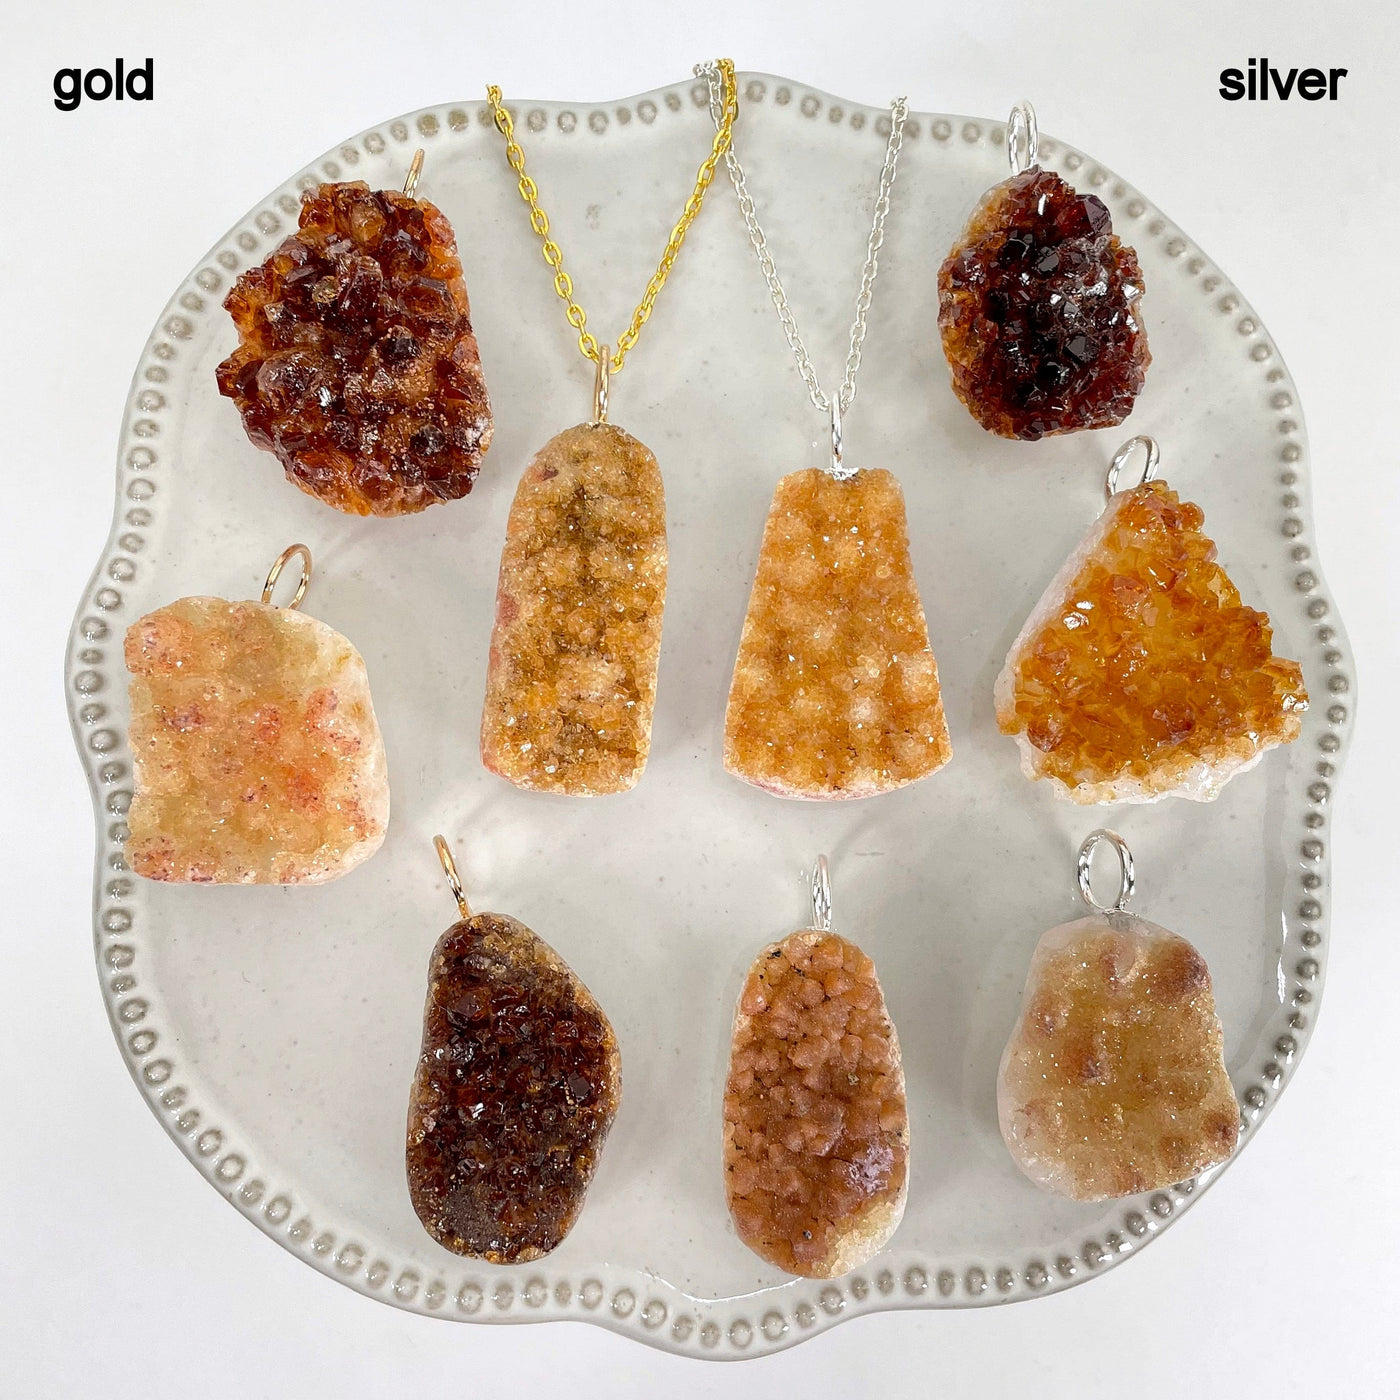 gold and silver golden amethyst druzy cluster pendants on display for finish comparison